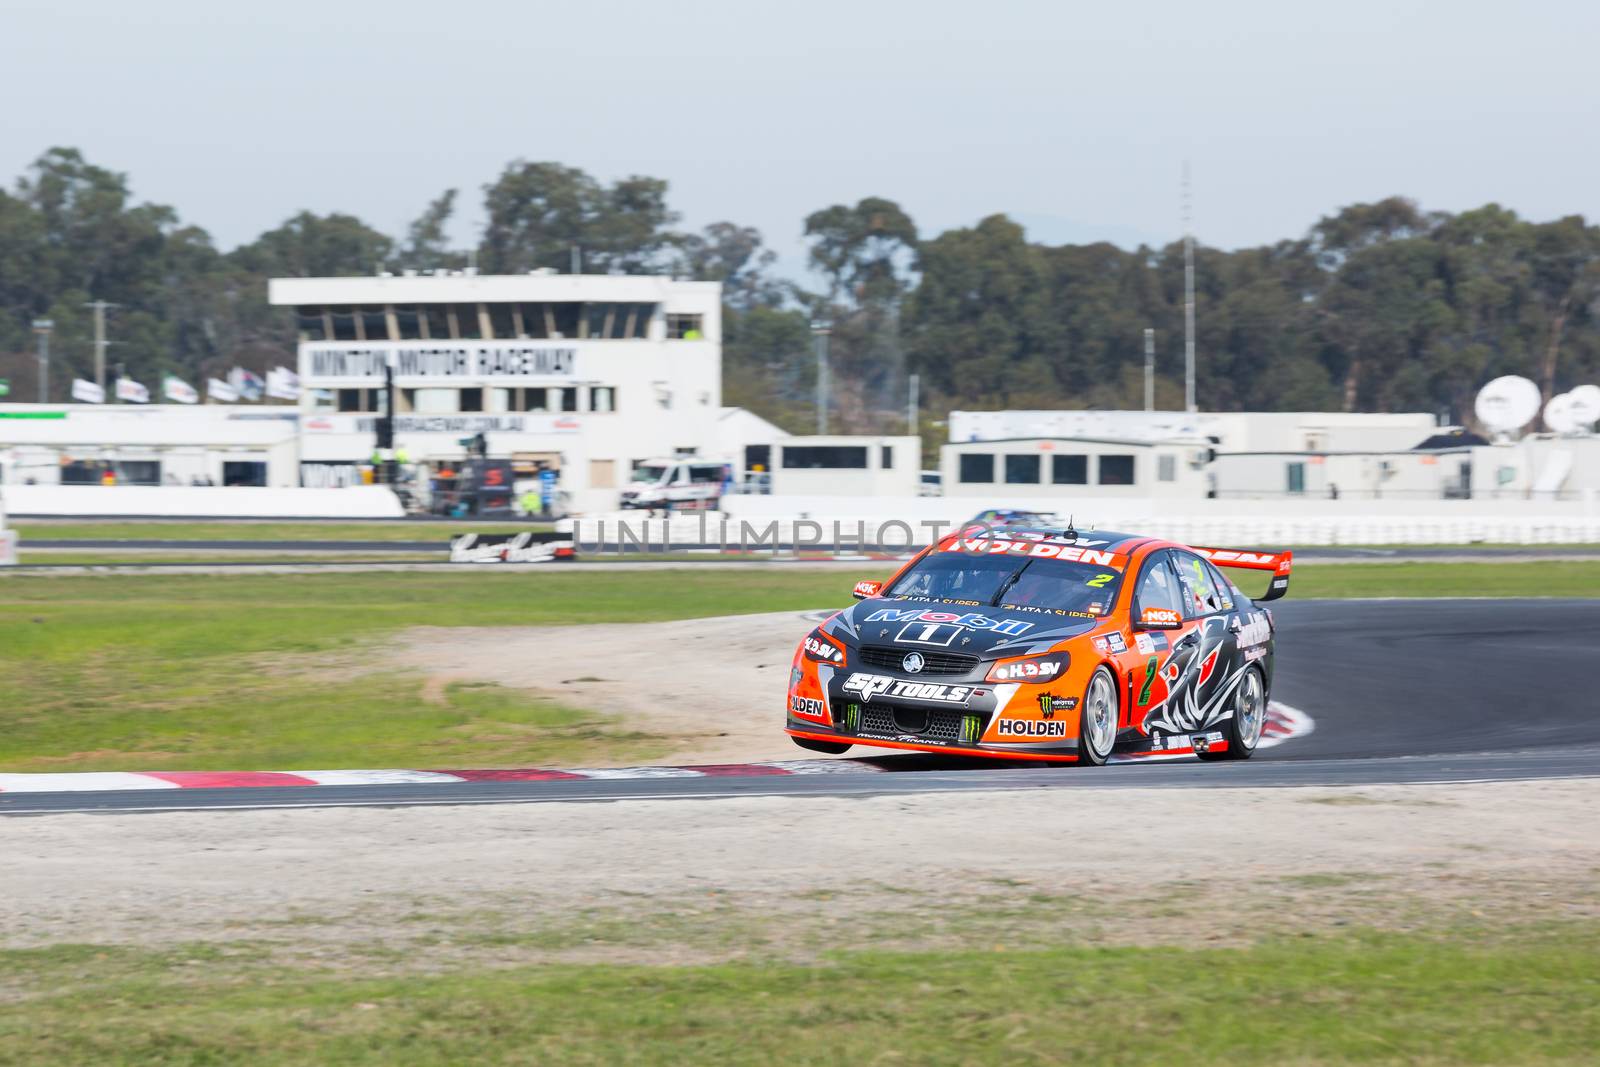 MELBOURNE, WINTON/AUSTRALIA, 22 MAY , 2016: Qualifiying session for race 11 of the Vigin Australia Supercars Champiionship at Winton Raceway.